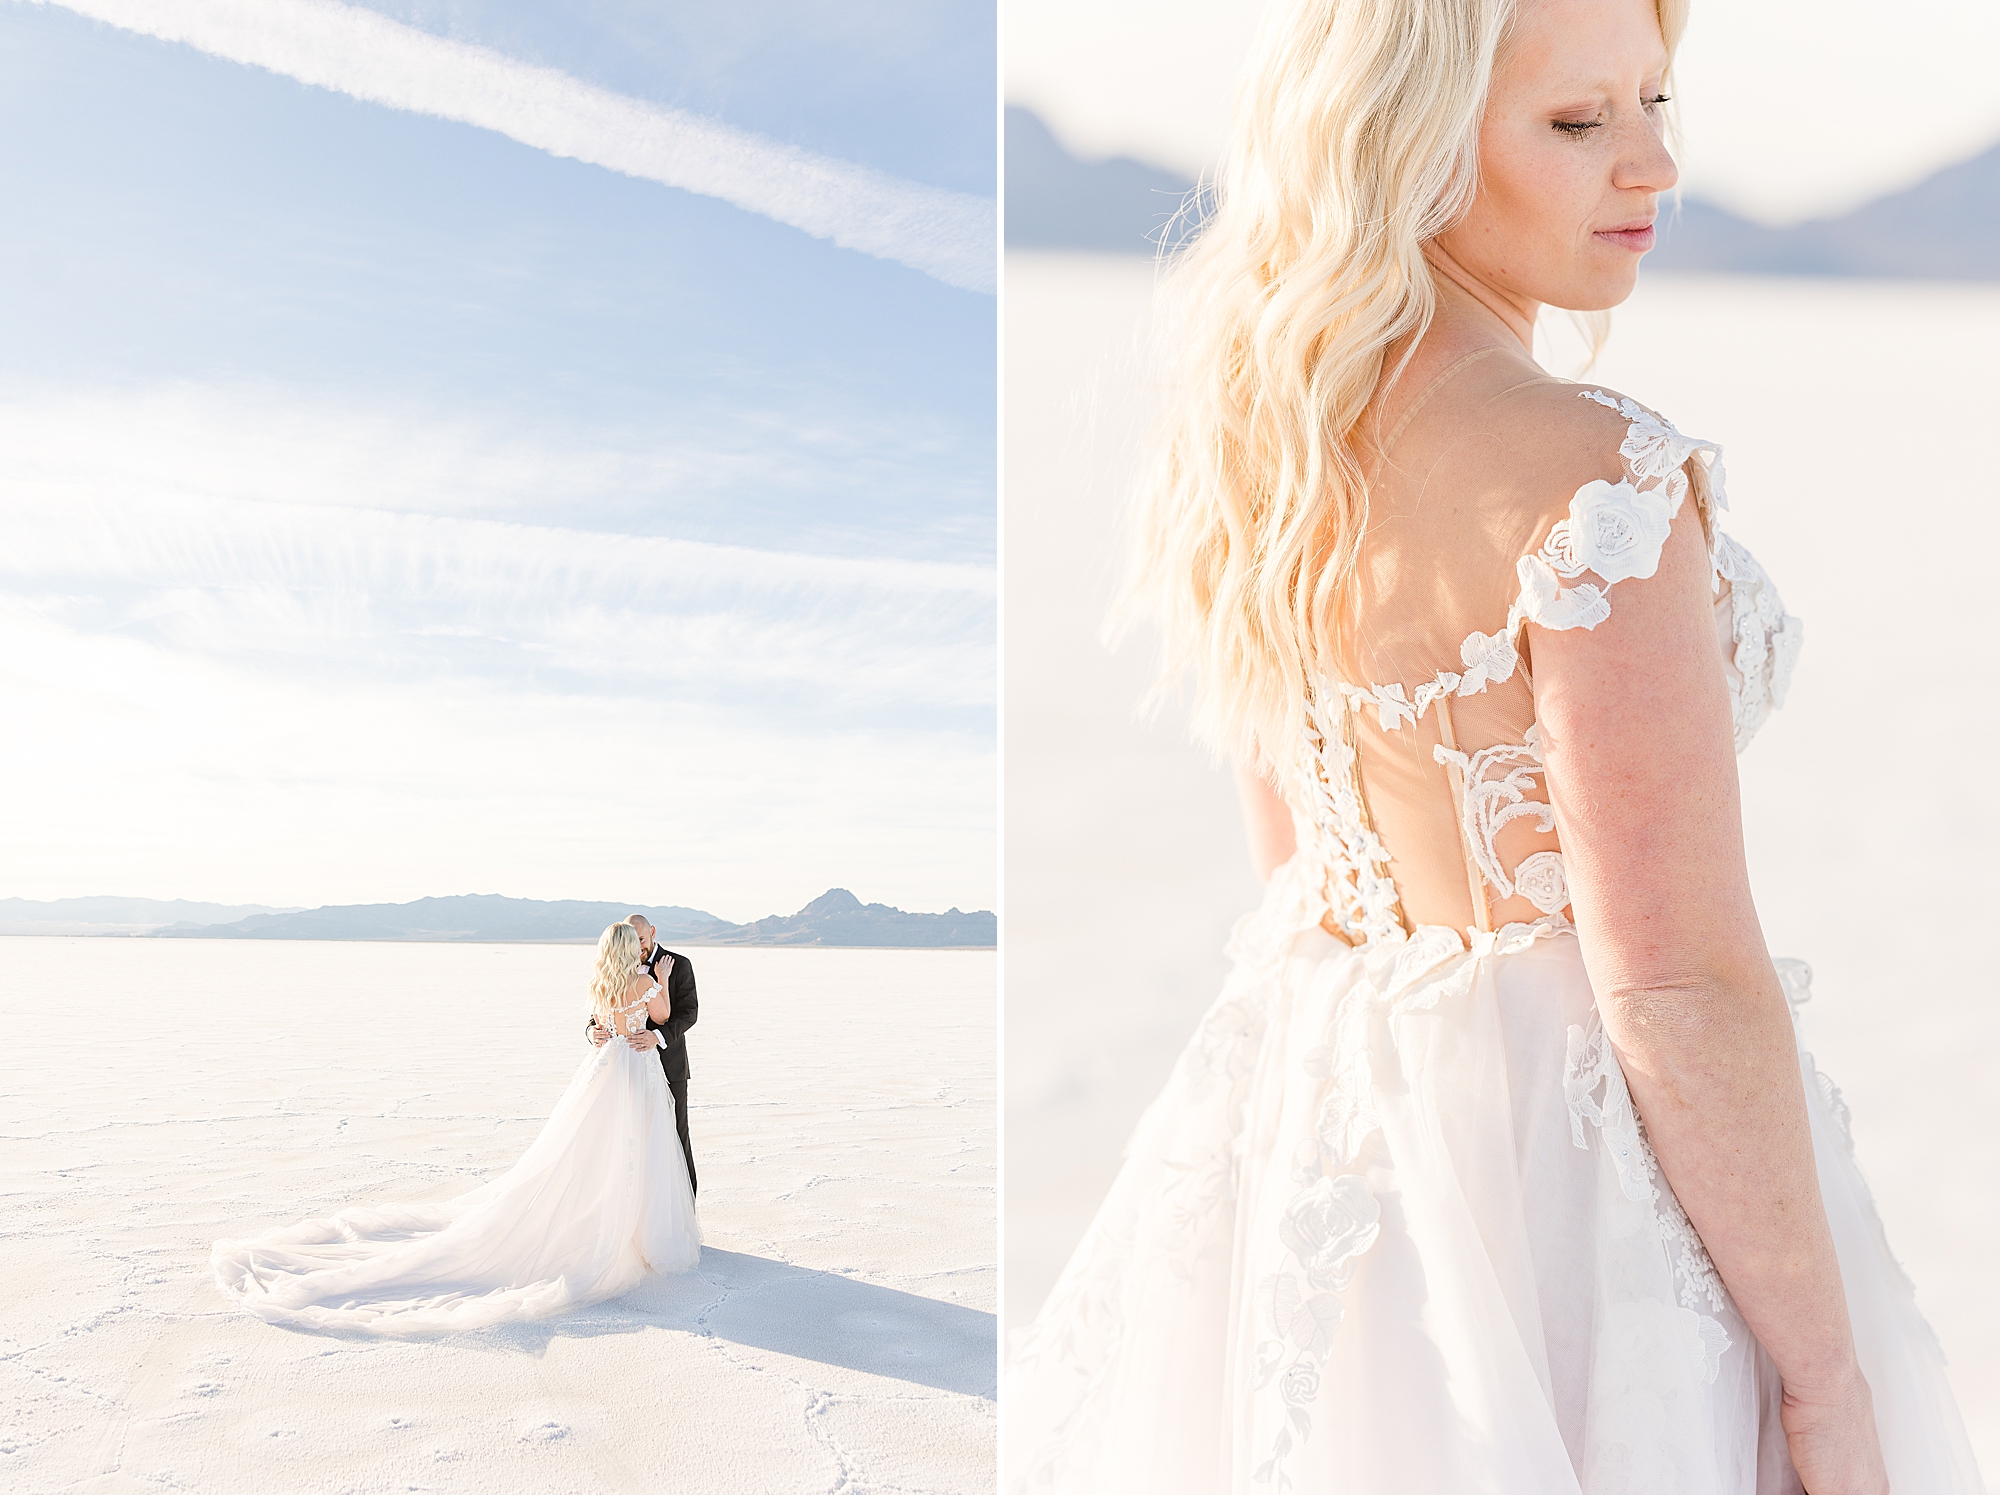 Intimate moment between bride and groom at the Bonneville Salt Flats